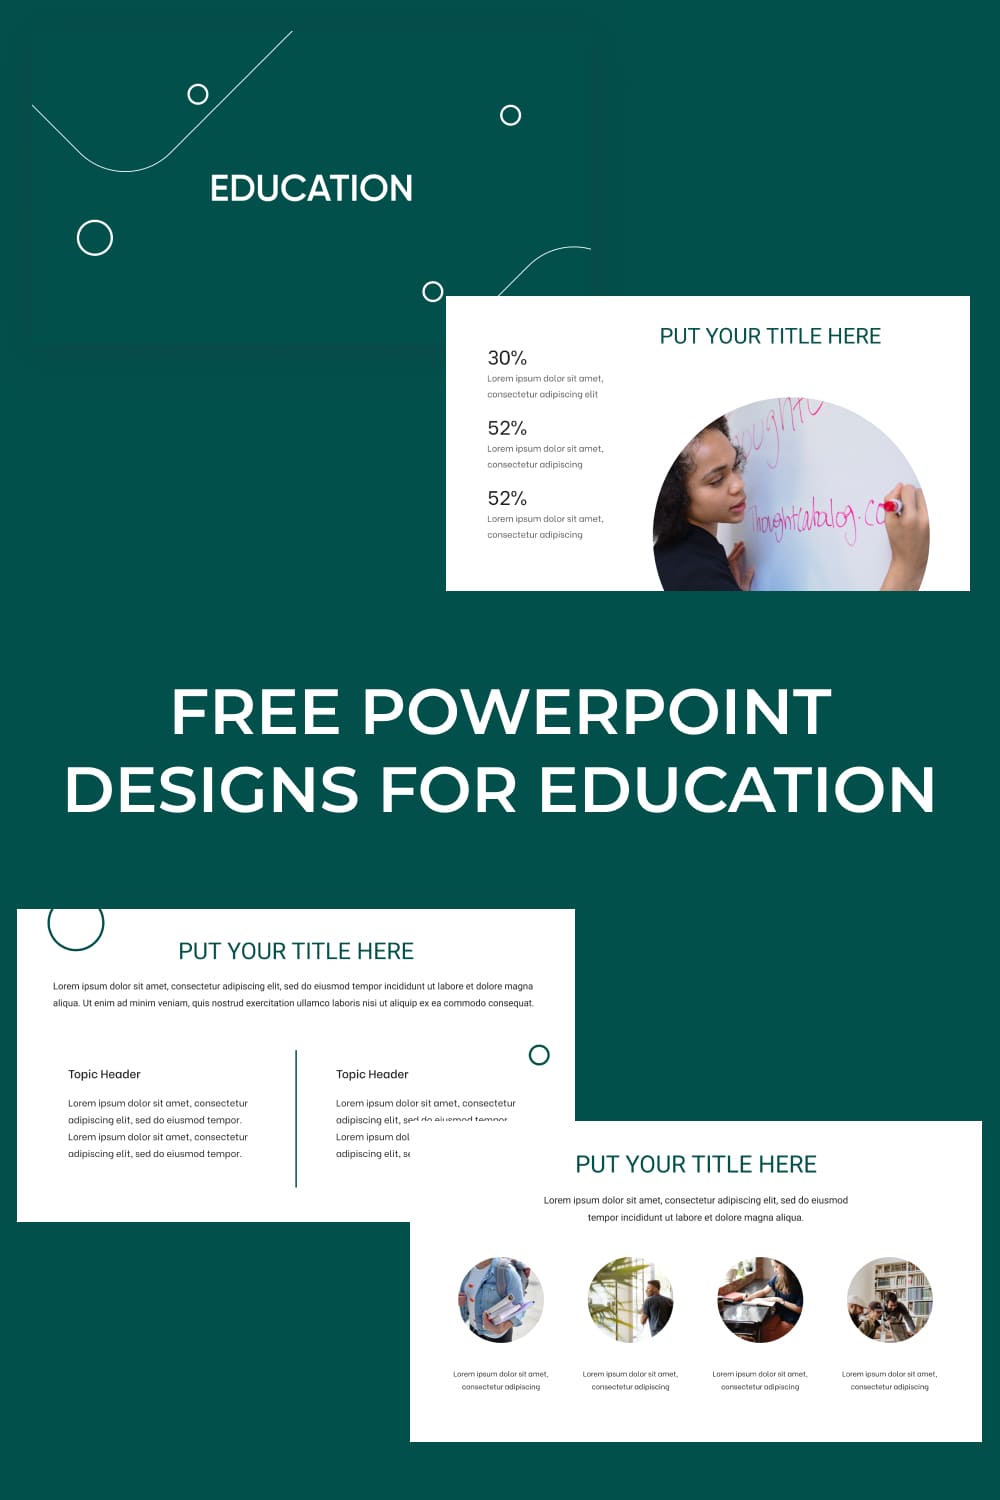 Pinterest Free Powerpoint Designs For Education.